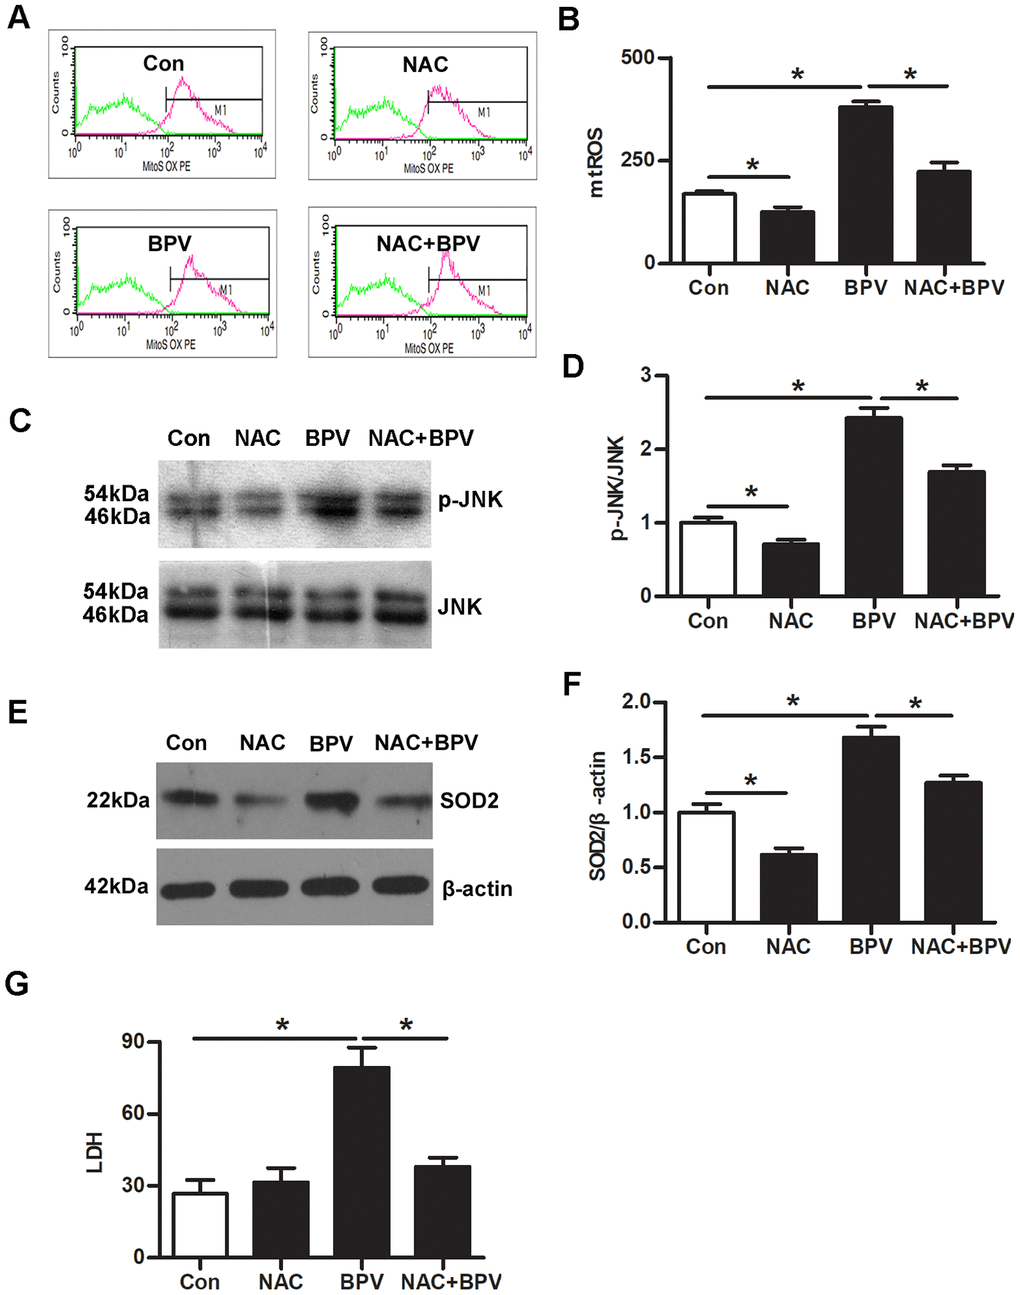 mtROS activated JNK signaling and stimulated SOD2 transcription in BPV-induced neuron oxidative stress. Con: untreated cells; NAC: cells treated with 5 mM NAC for 30 min; BPV: cells treated with 2.0 mM BPV for 60 min; NAC+BPV: cells pretreated with 5 mM NAC for 30 min, following treated with 2.0 mM BPV for 60 min. (A, B) the fluorescence intensities of mtROS in cells pretreated with NAC, following incubation with BPV; (C, D) the western blot analysis showed JNK phosphorylation in cells pretreated with NAC, following incubation with BPV; (E, F) the western blot analysis showed SOD2 transcription in cells pretreated with NAC, following incubation with BPV; (G) LDH production in cells treated with 2.0 mM BPV for 60min and/or pretreated with 5 mM NAC for 30min. Values are the mean± SEM of n = 3, *: P